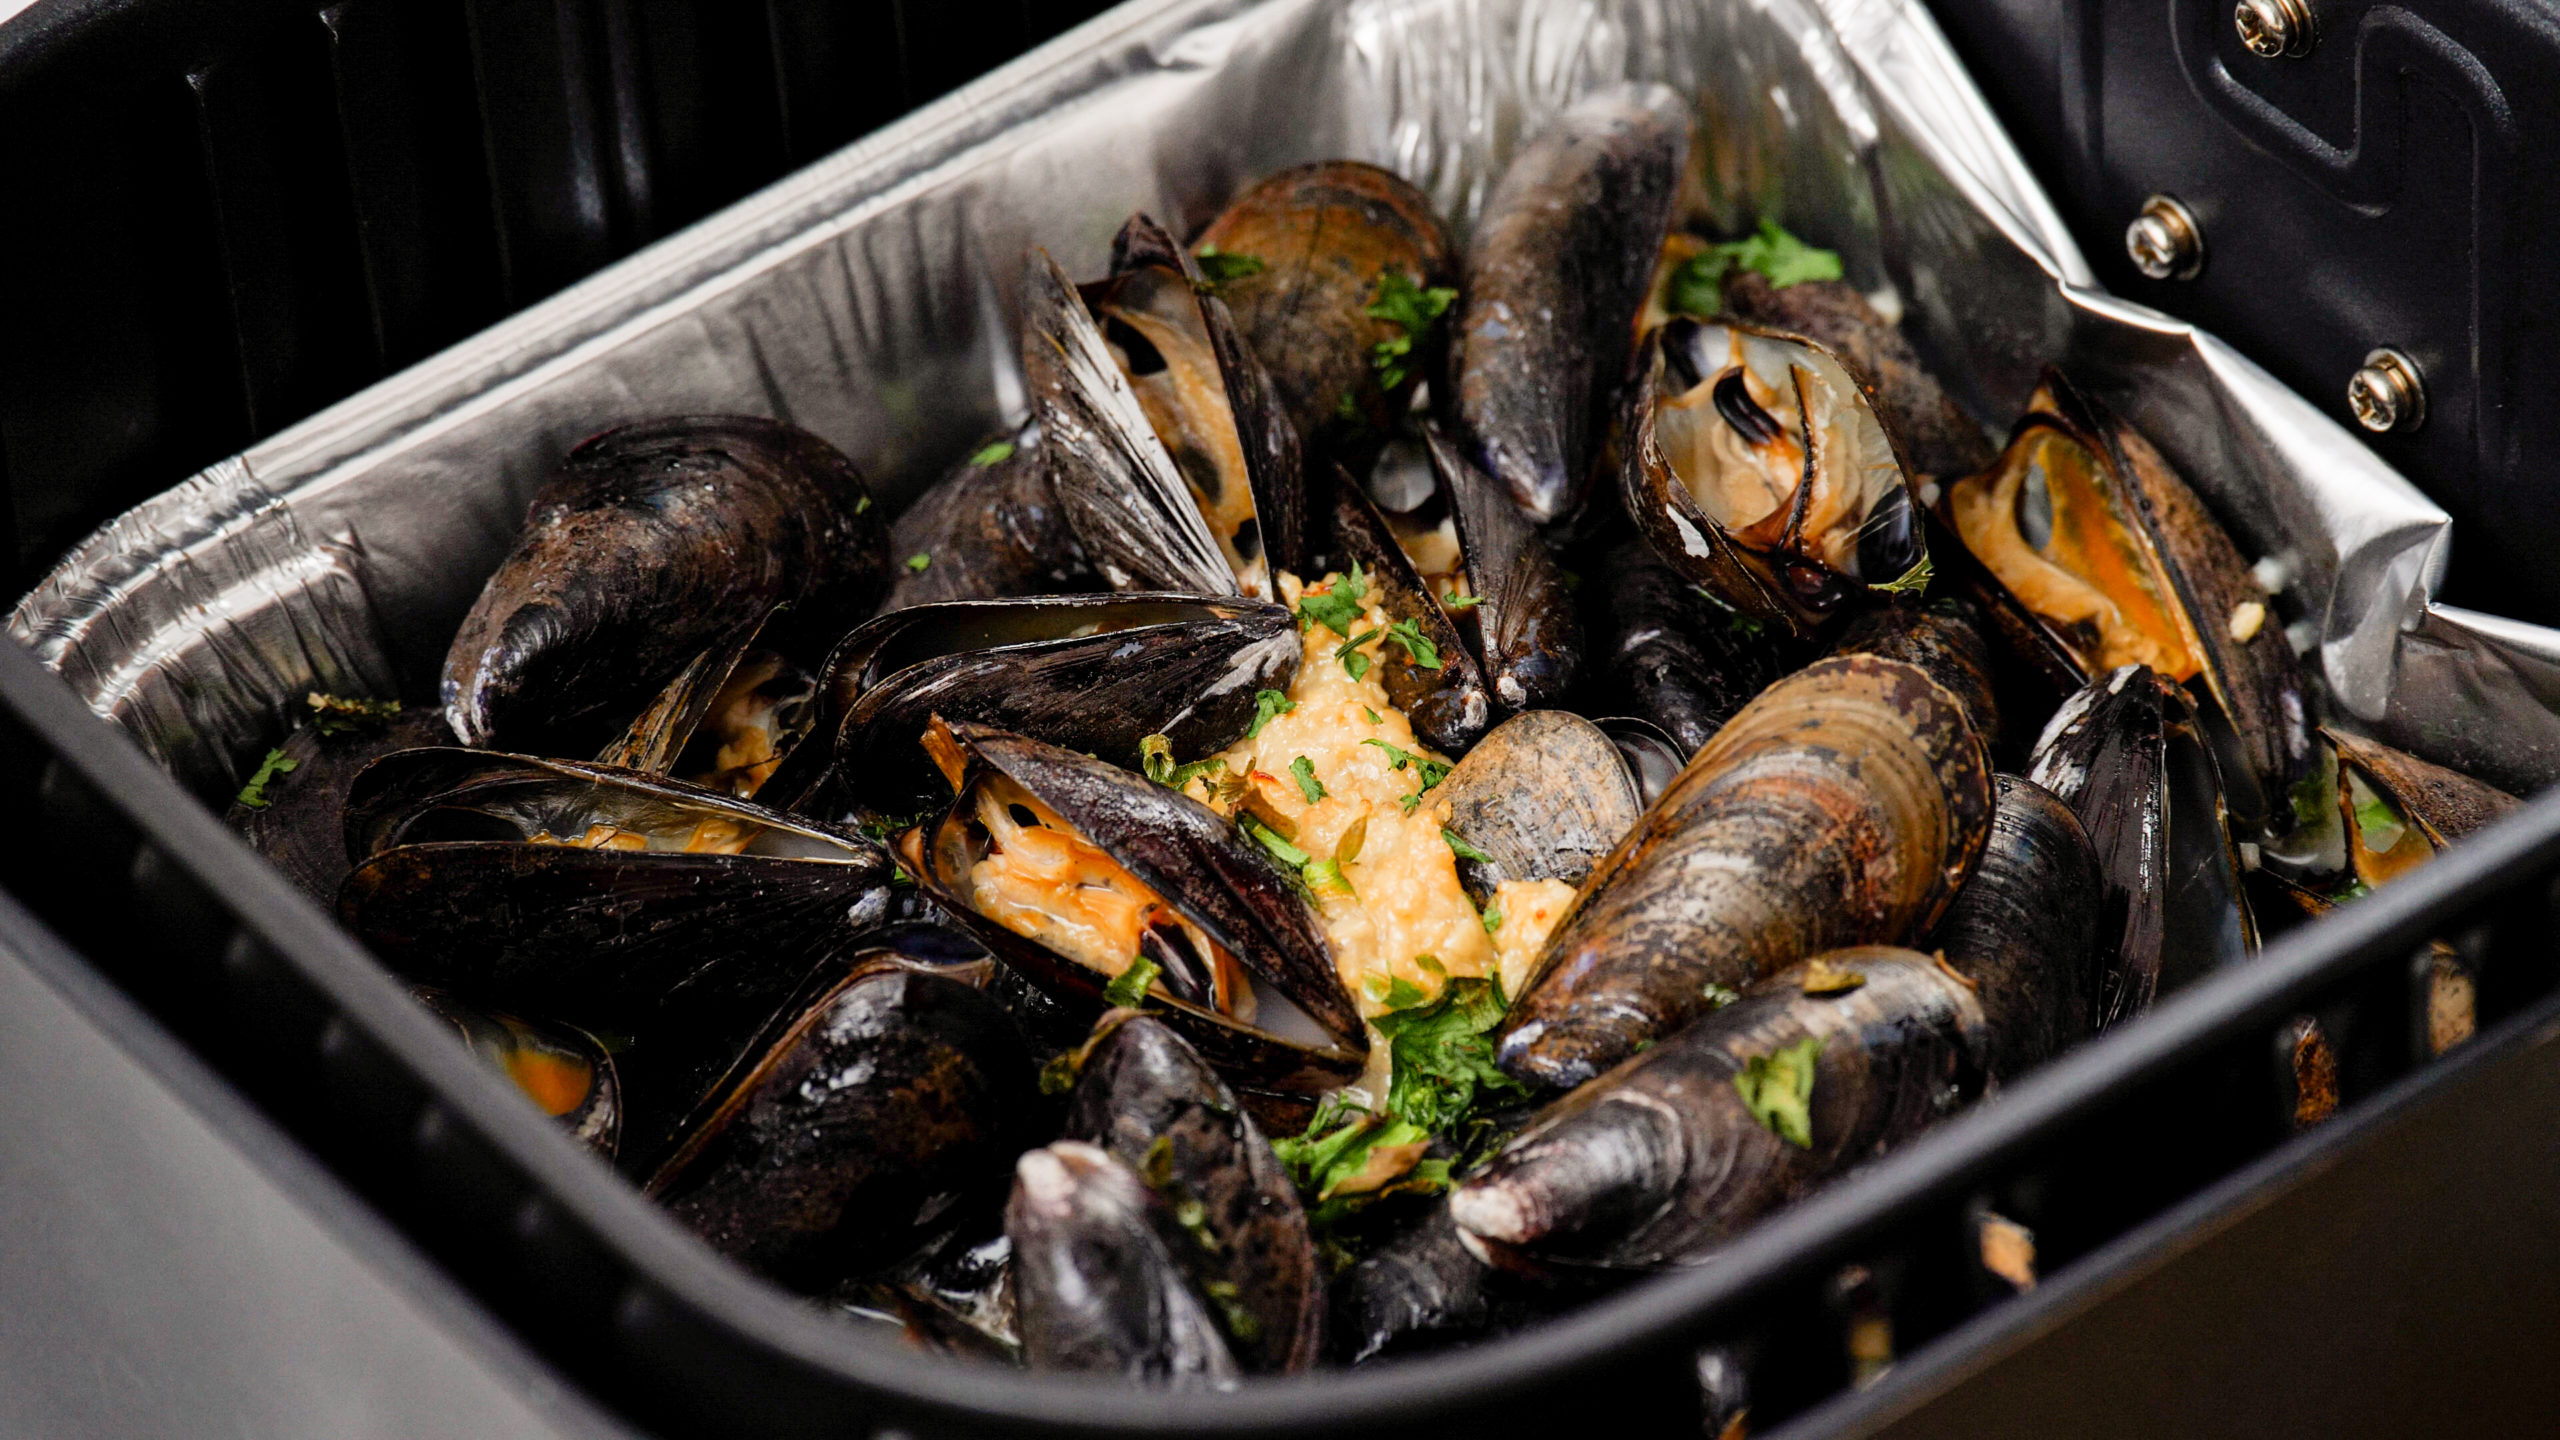 https://forktospoon.com/wp-content/uploads/2023/01/Air-Fryer-Mussels-11-scaled.jpg